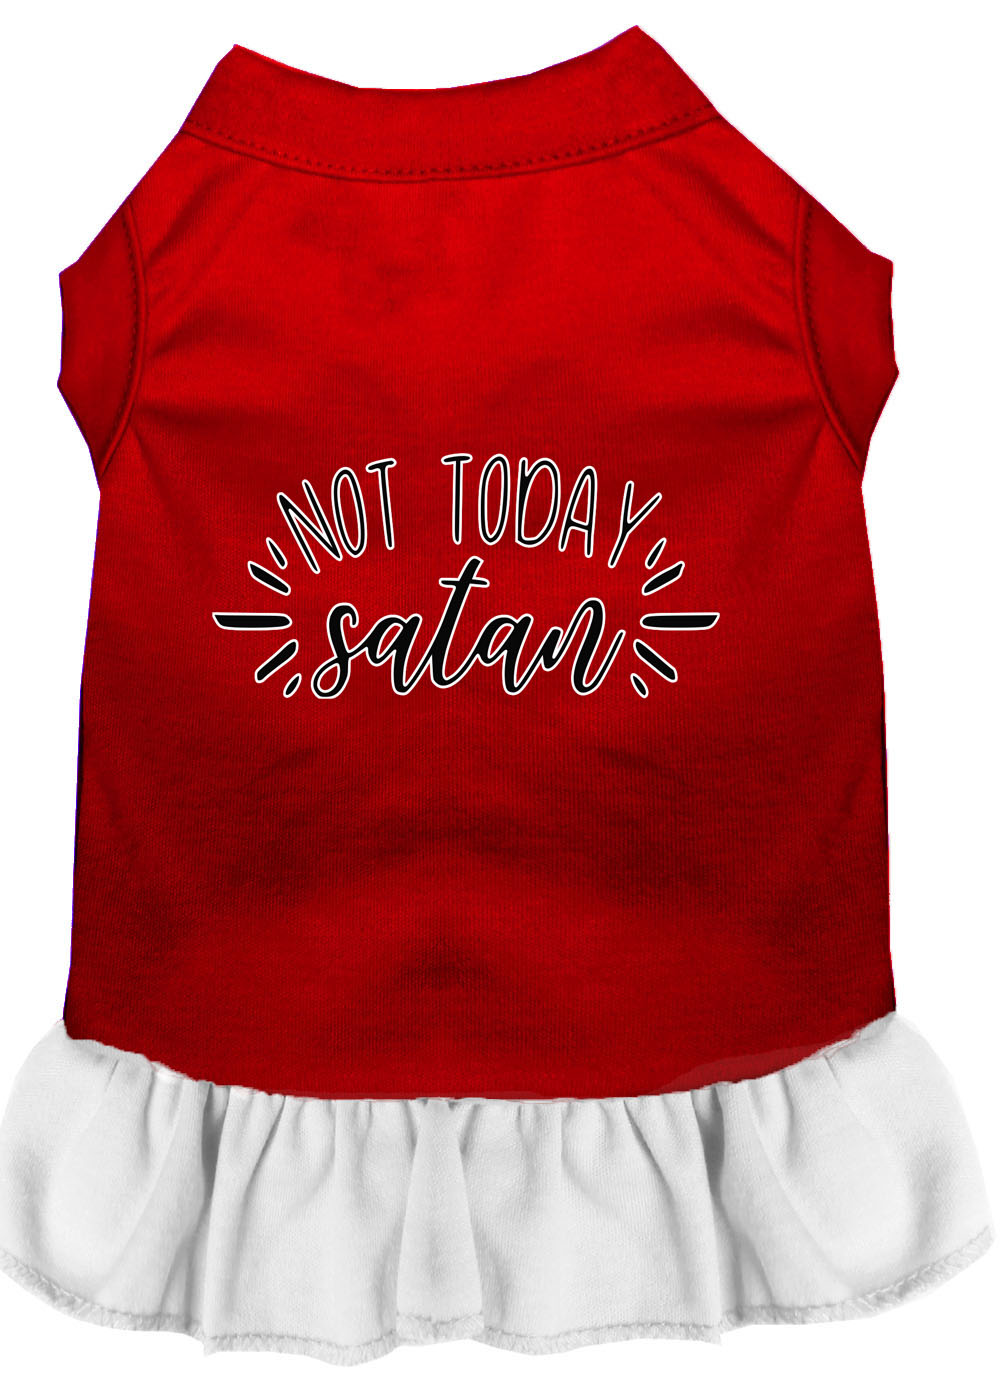 Not Today Satan Screen Print Dog Dress Red with White Lg